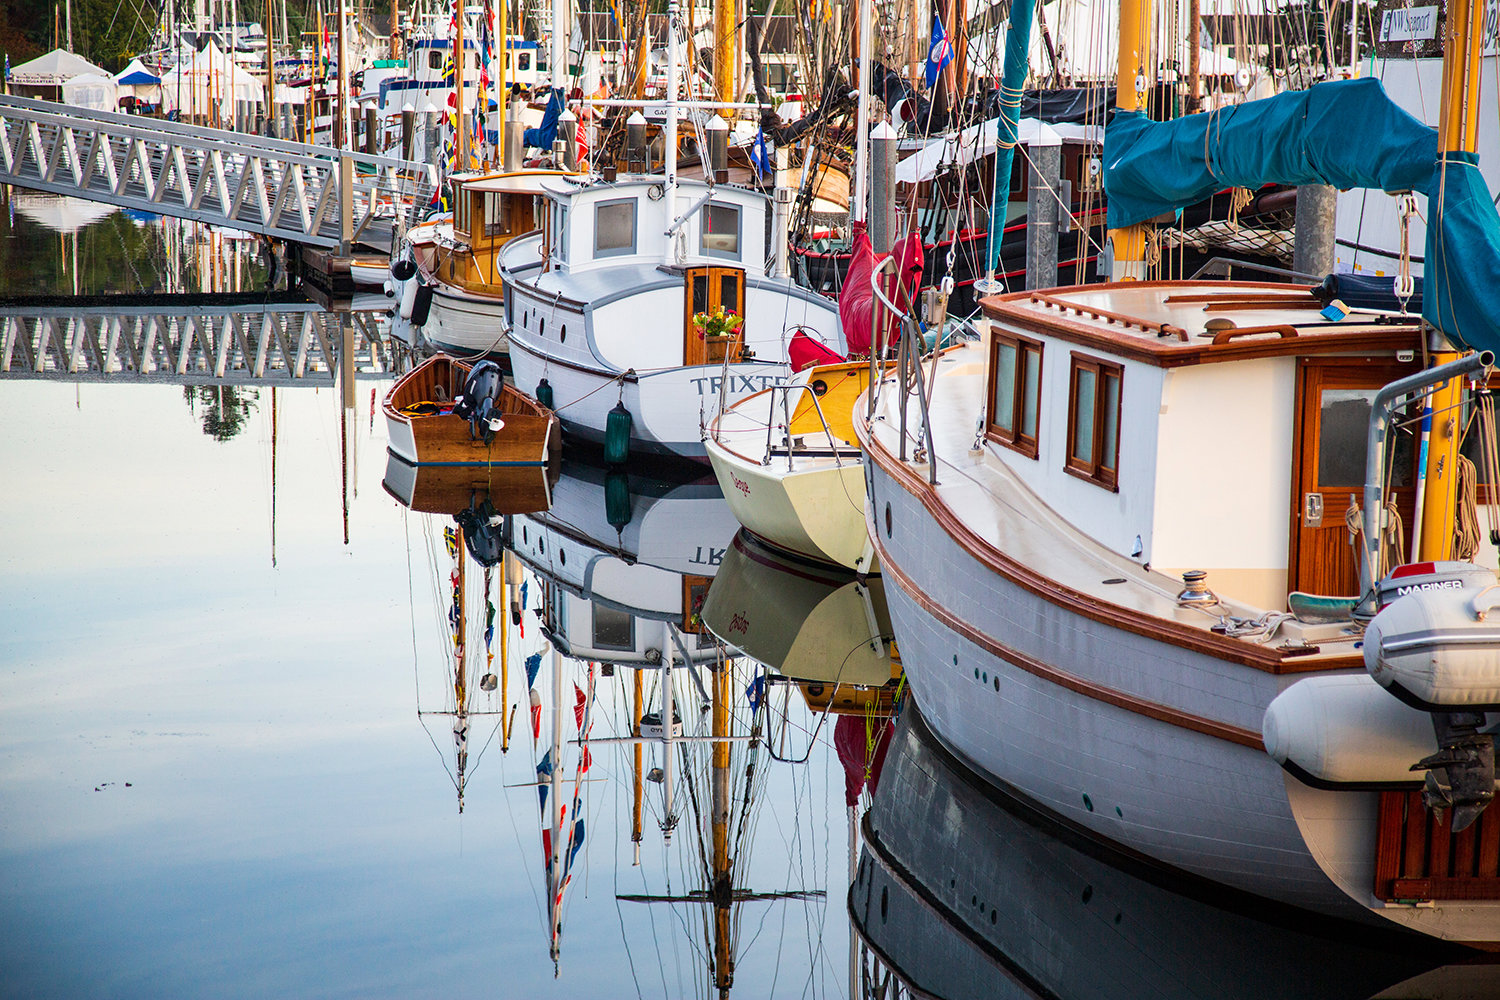 This photo of boats in Port Townsend by Crystal Craig was the September winner in the 2022 calendar.